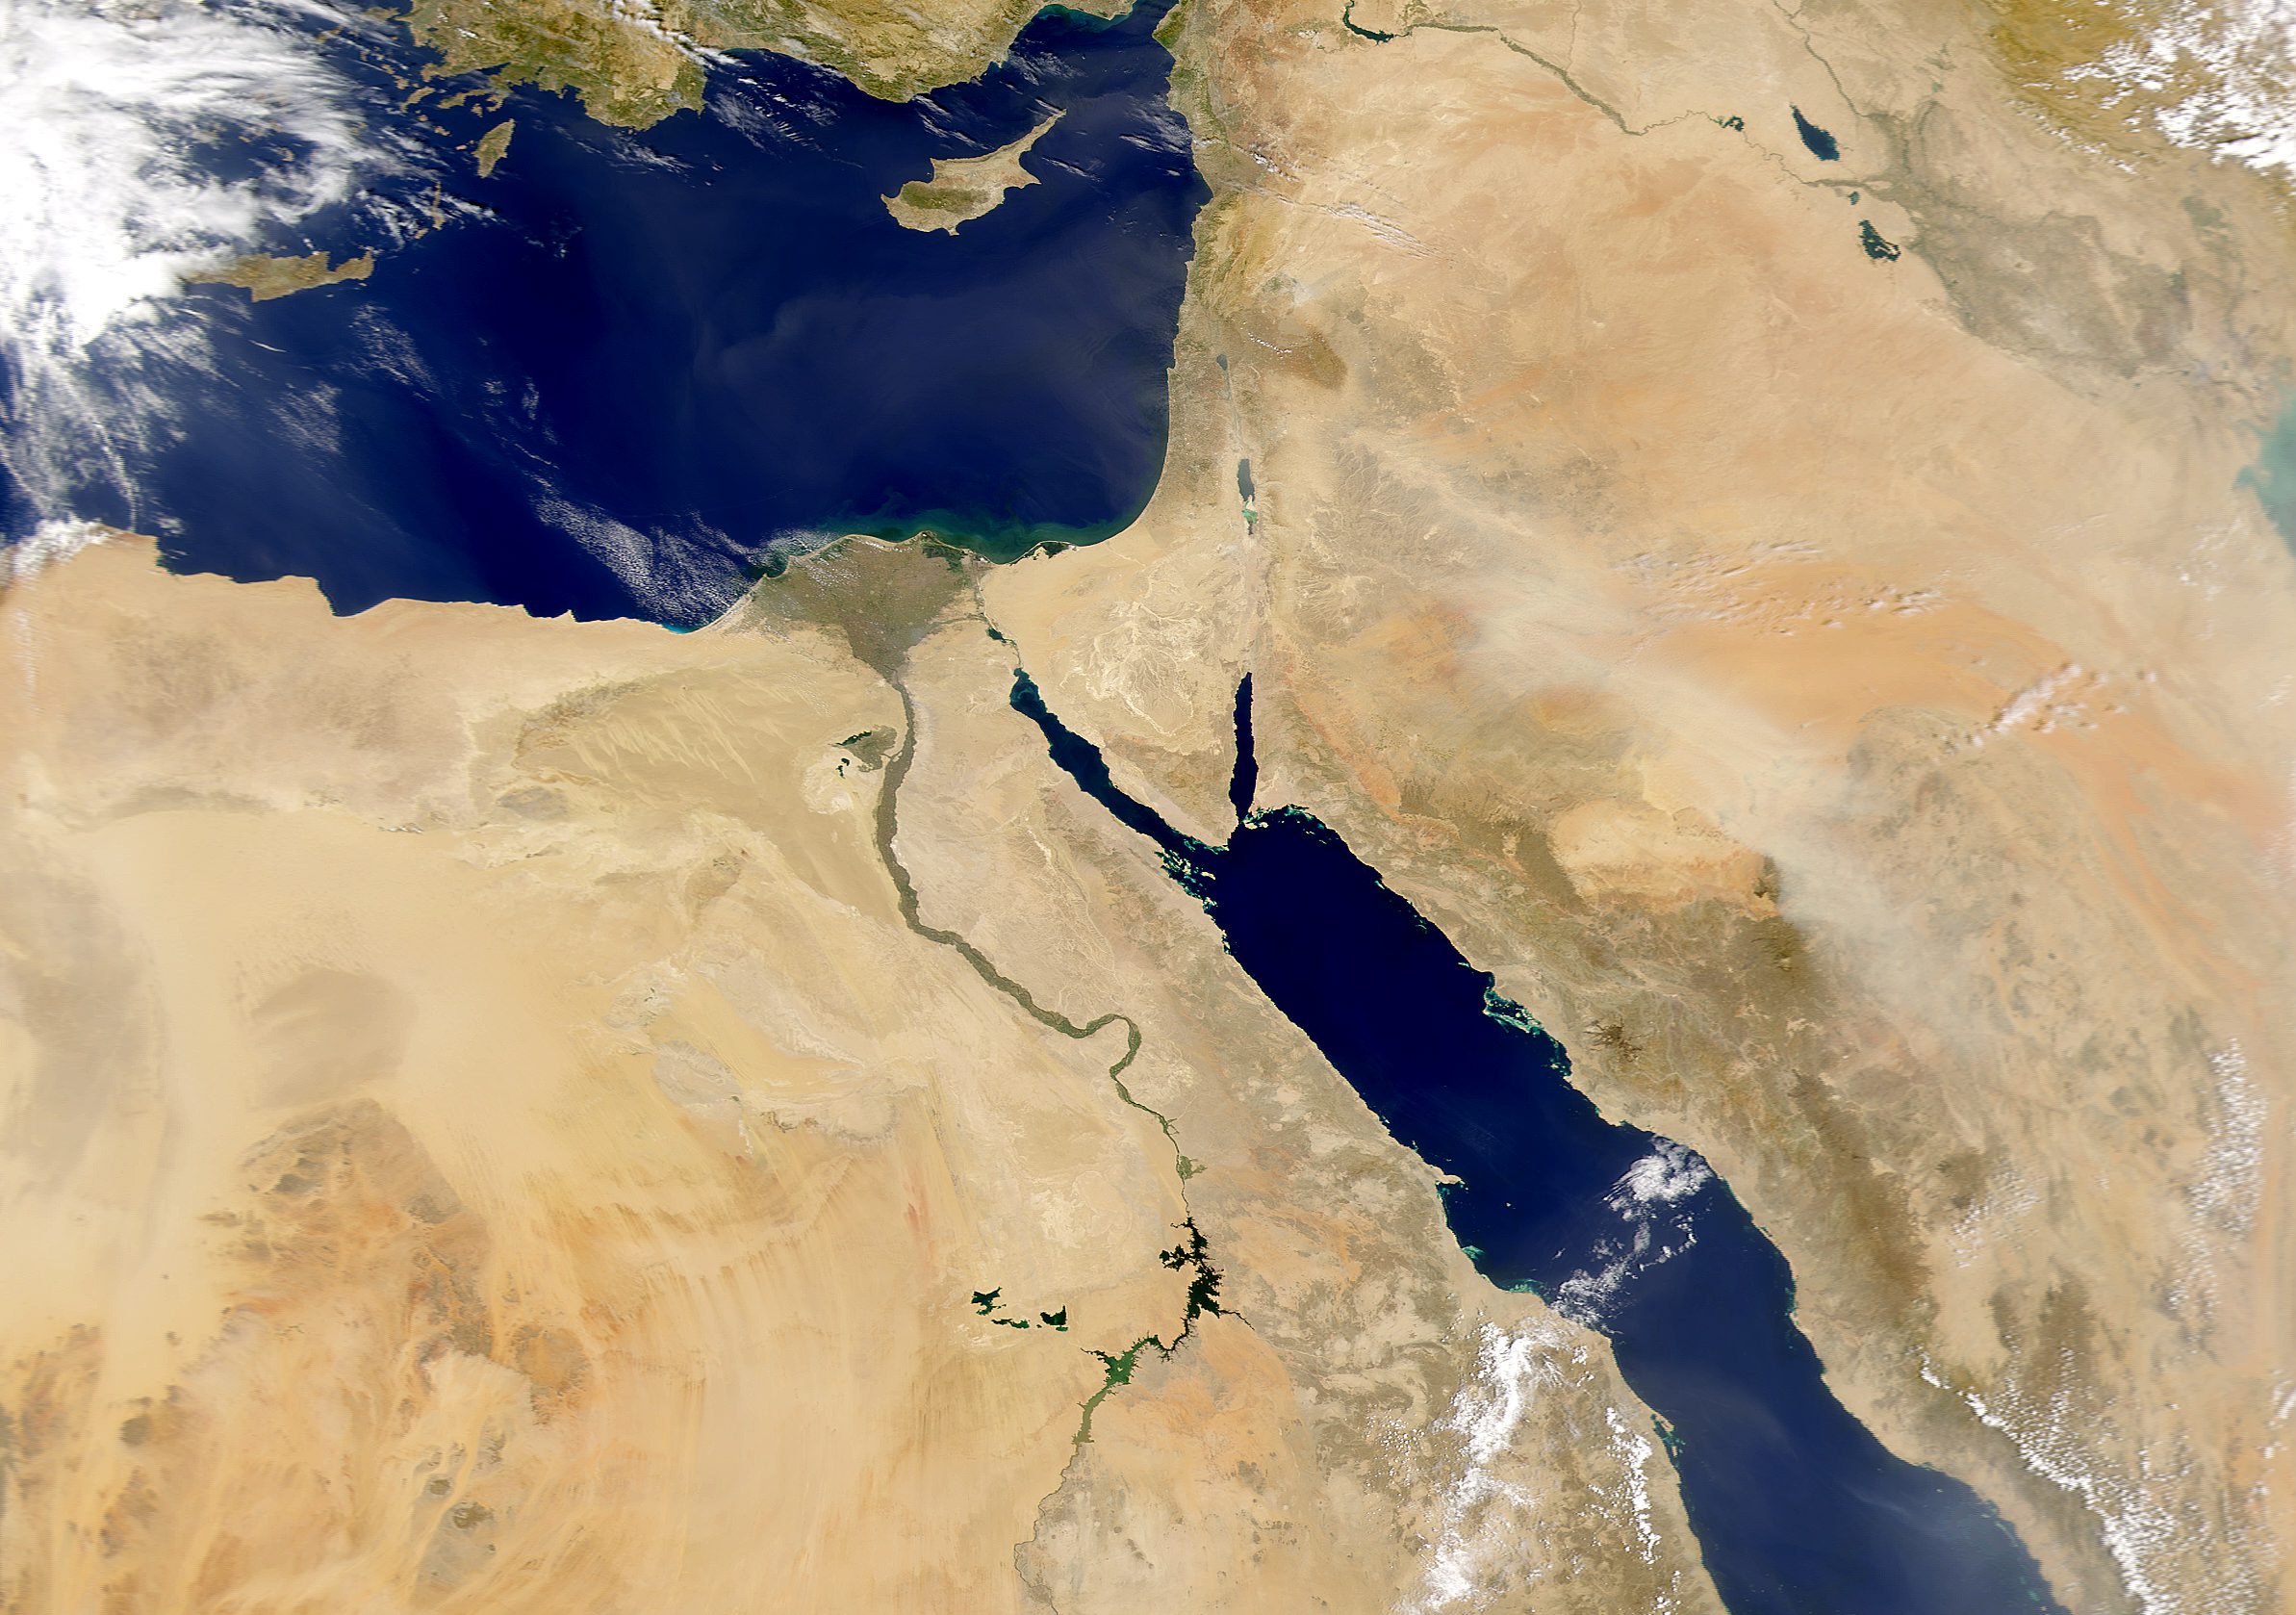 NASA Photo of the Red Sea and Eastern Mediterranean